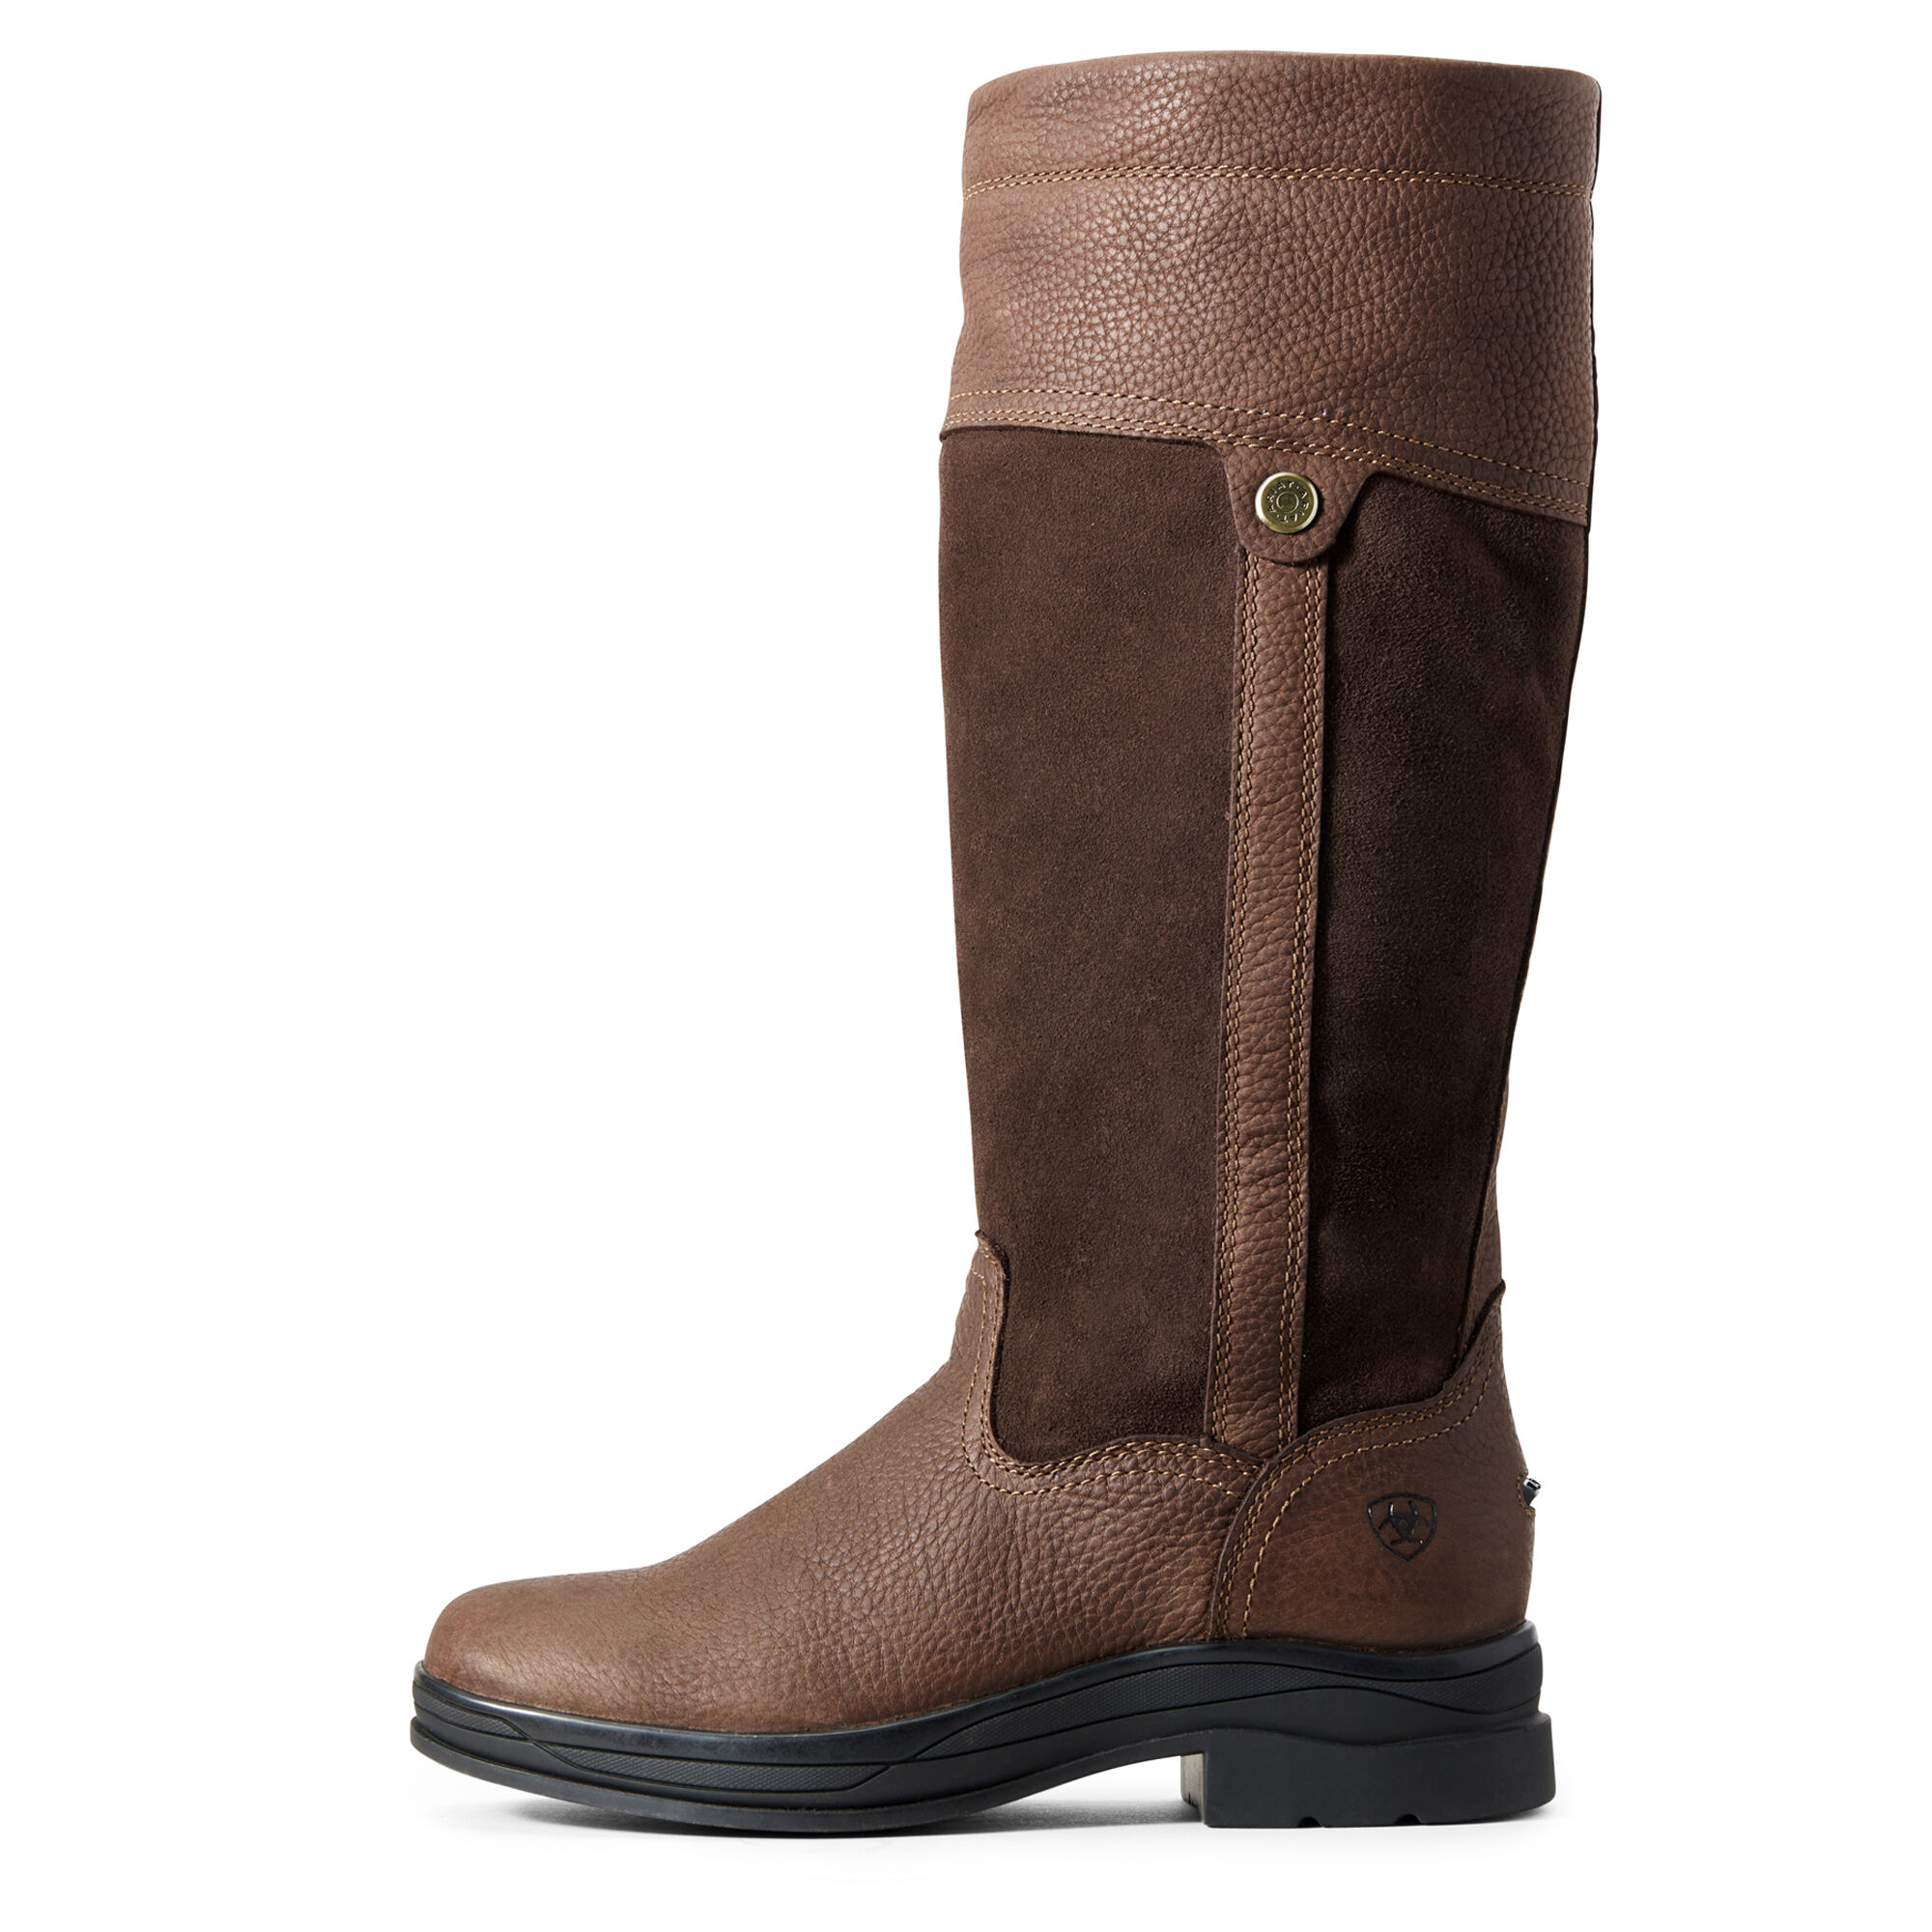 New Ariat Womens Windermere II Long Boots In Brown Various Sizes 